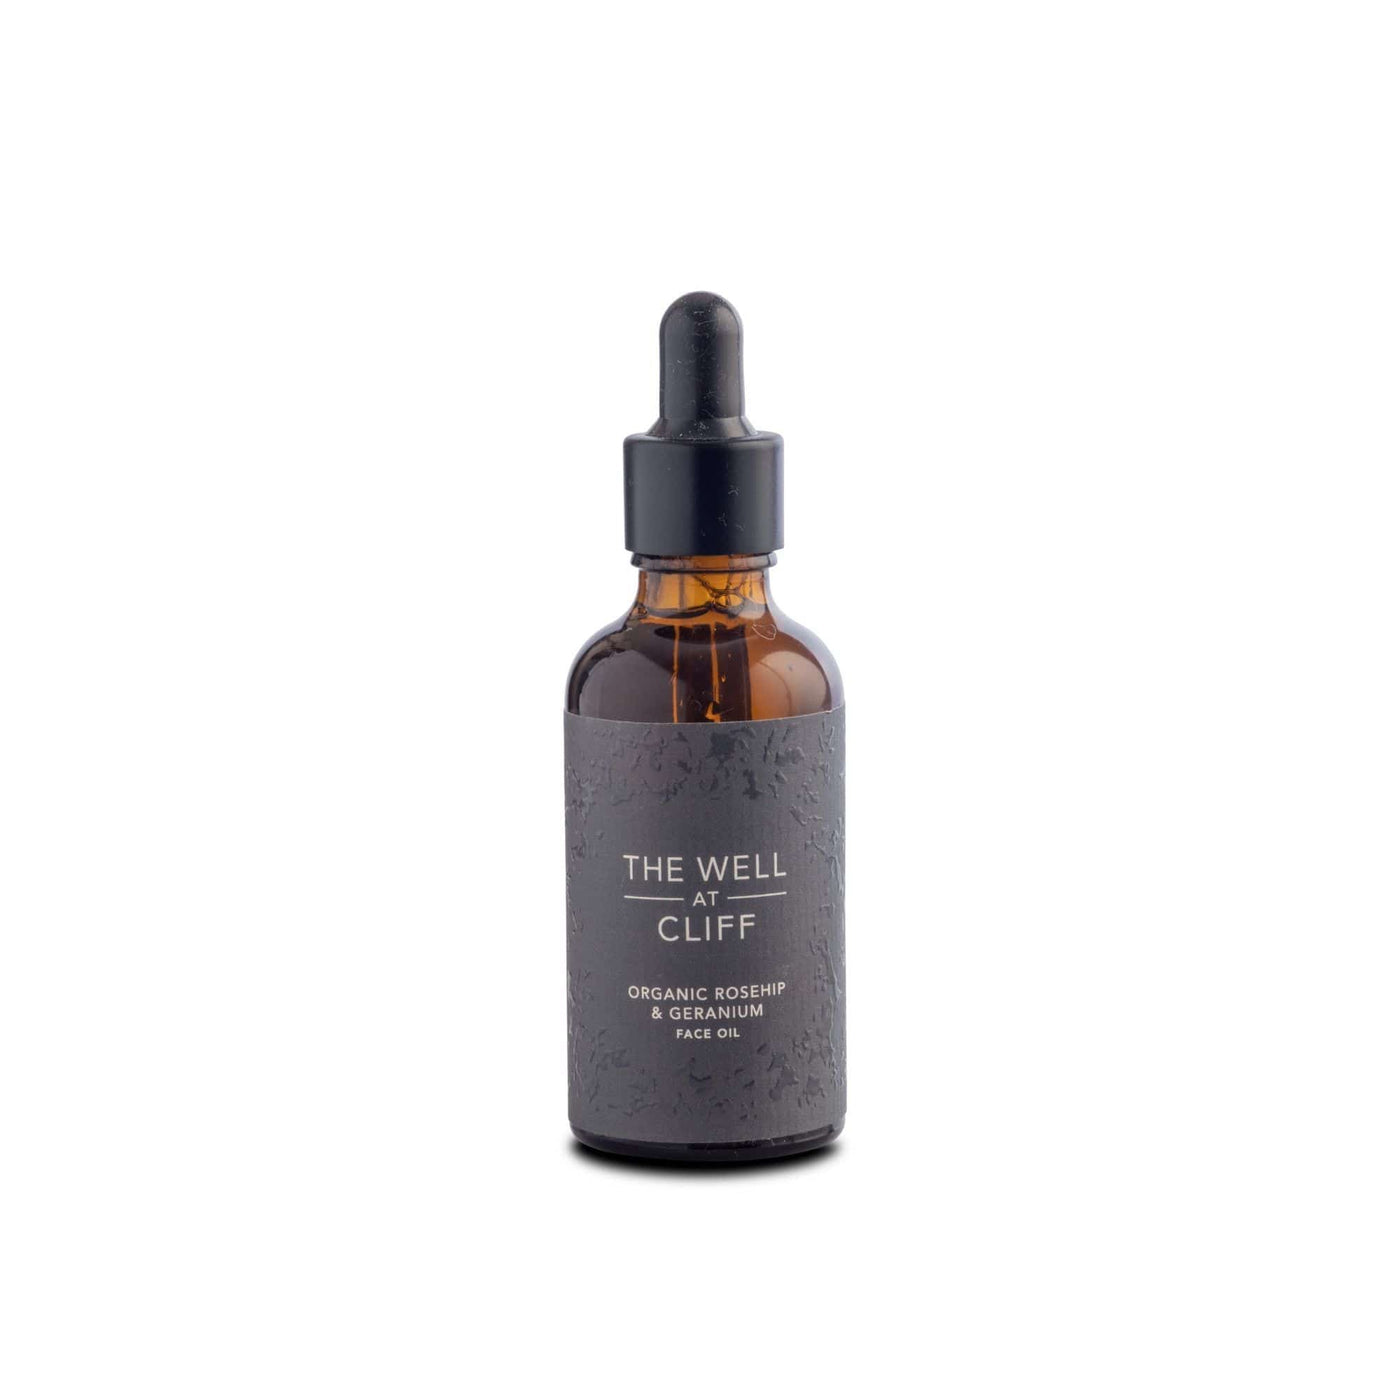 The Well at CLIFF Intense Recovery Face Oil